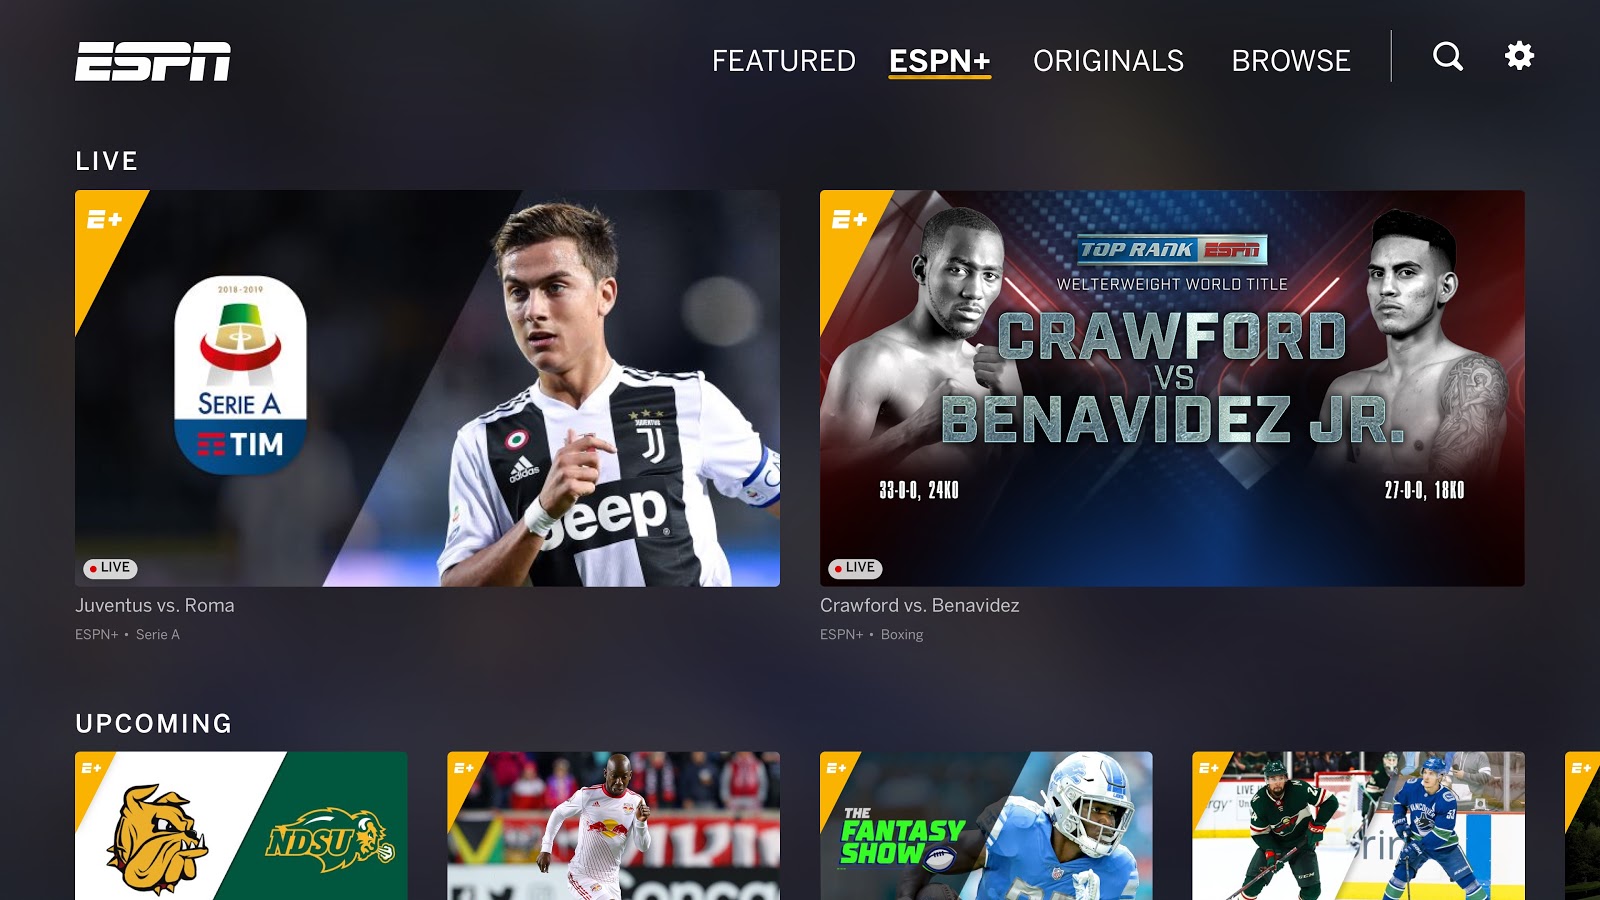 Espn Now Available On Playstation 4, Xbox One - Espn Inc. , HD Wallpaper & Backgrounds